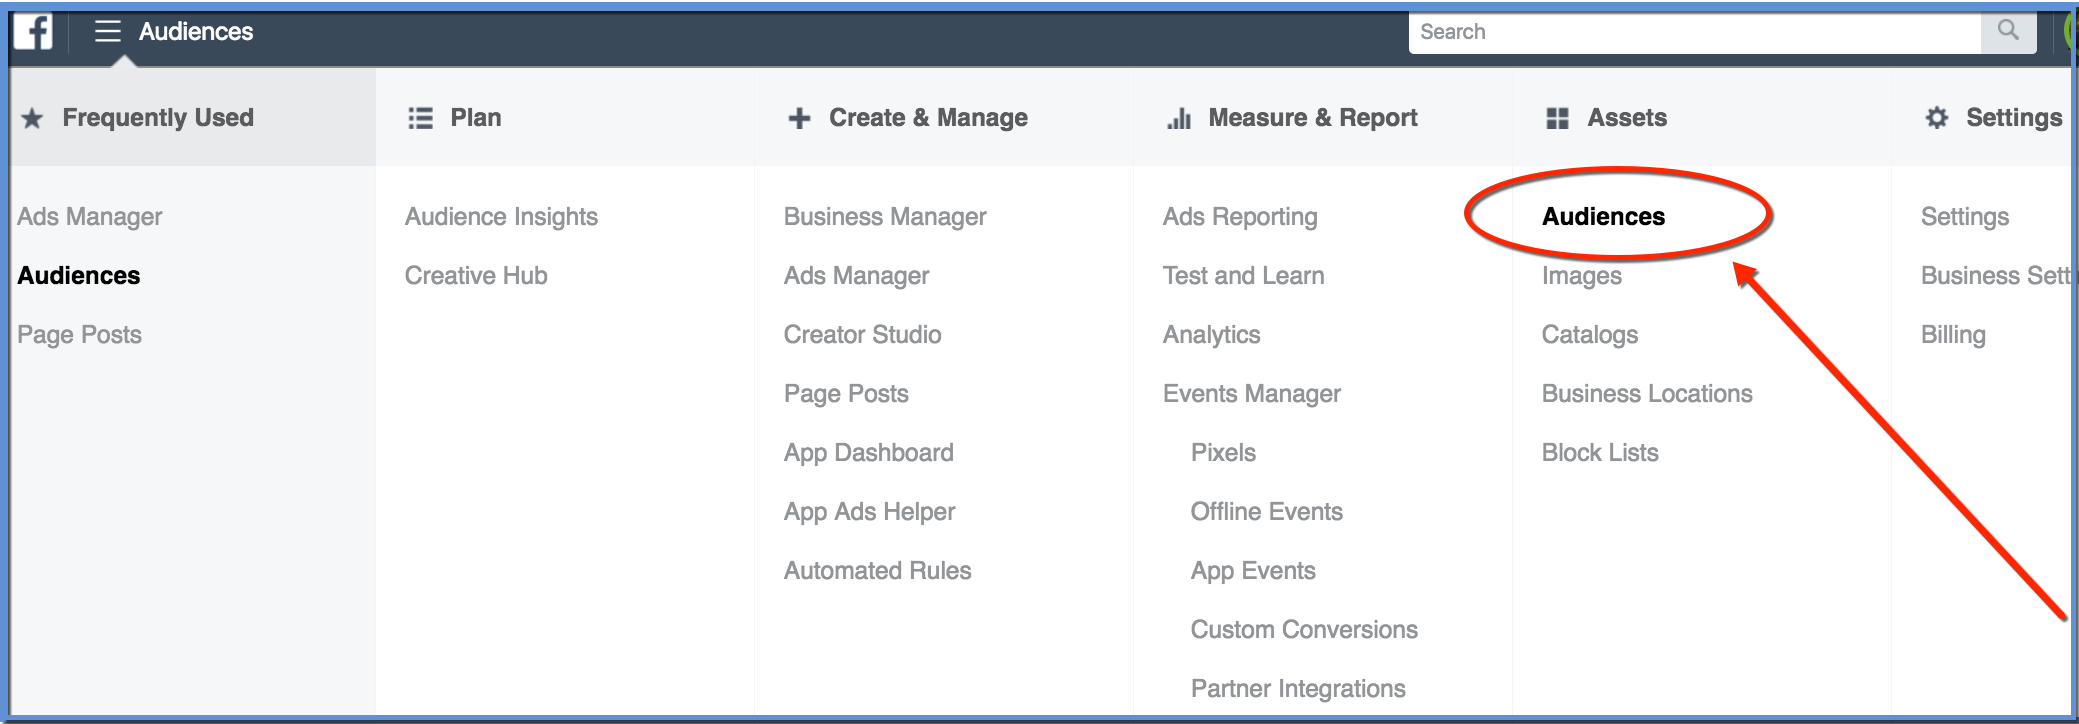 Audiences Tool Ads Manager and Business Manager